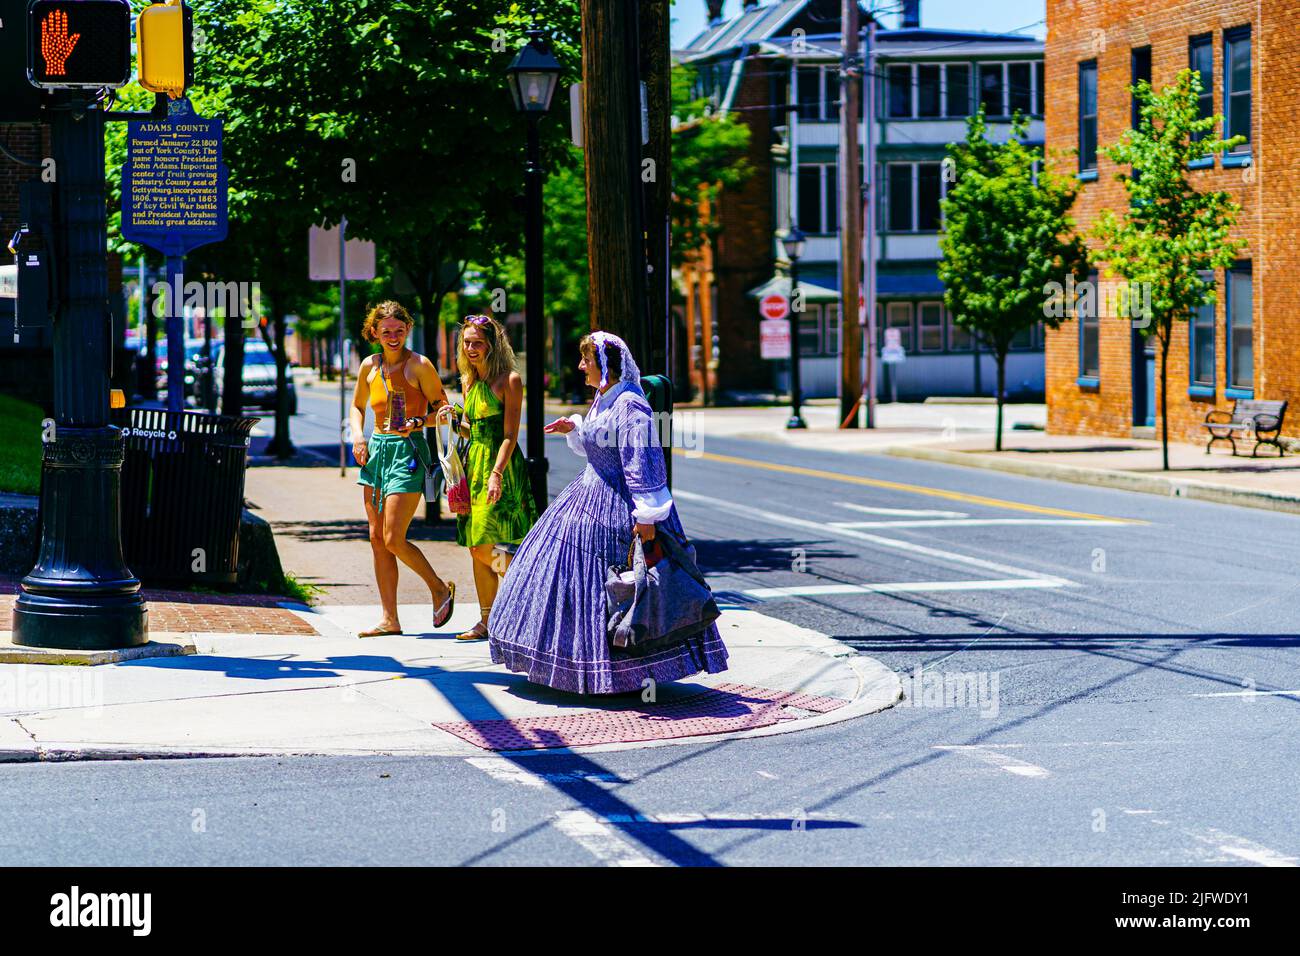 Gettysburg, PA, USA – July 3, 2022: A Civil War era reenactor walks on street in the historic town of Gettysburg wearing period over the July 4th cele Stock Photo